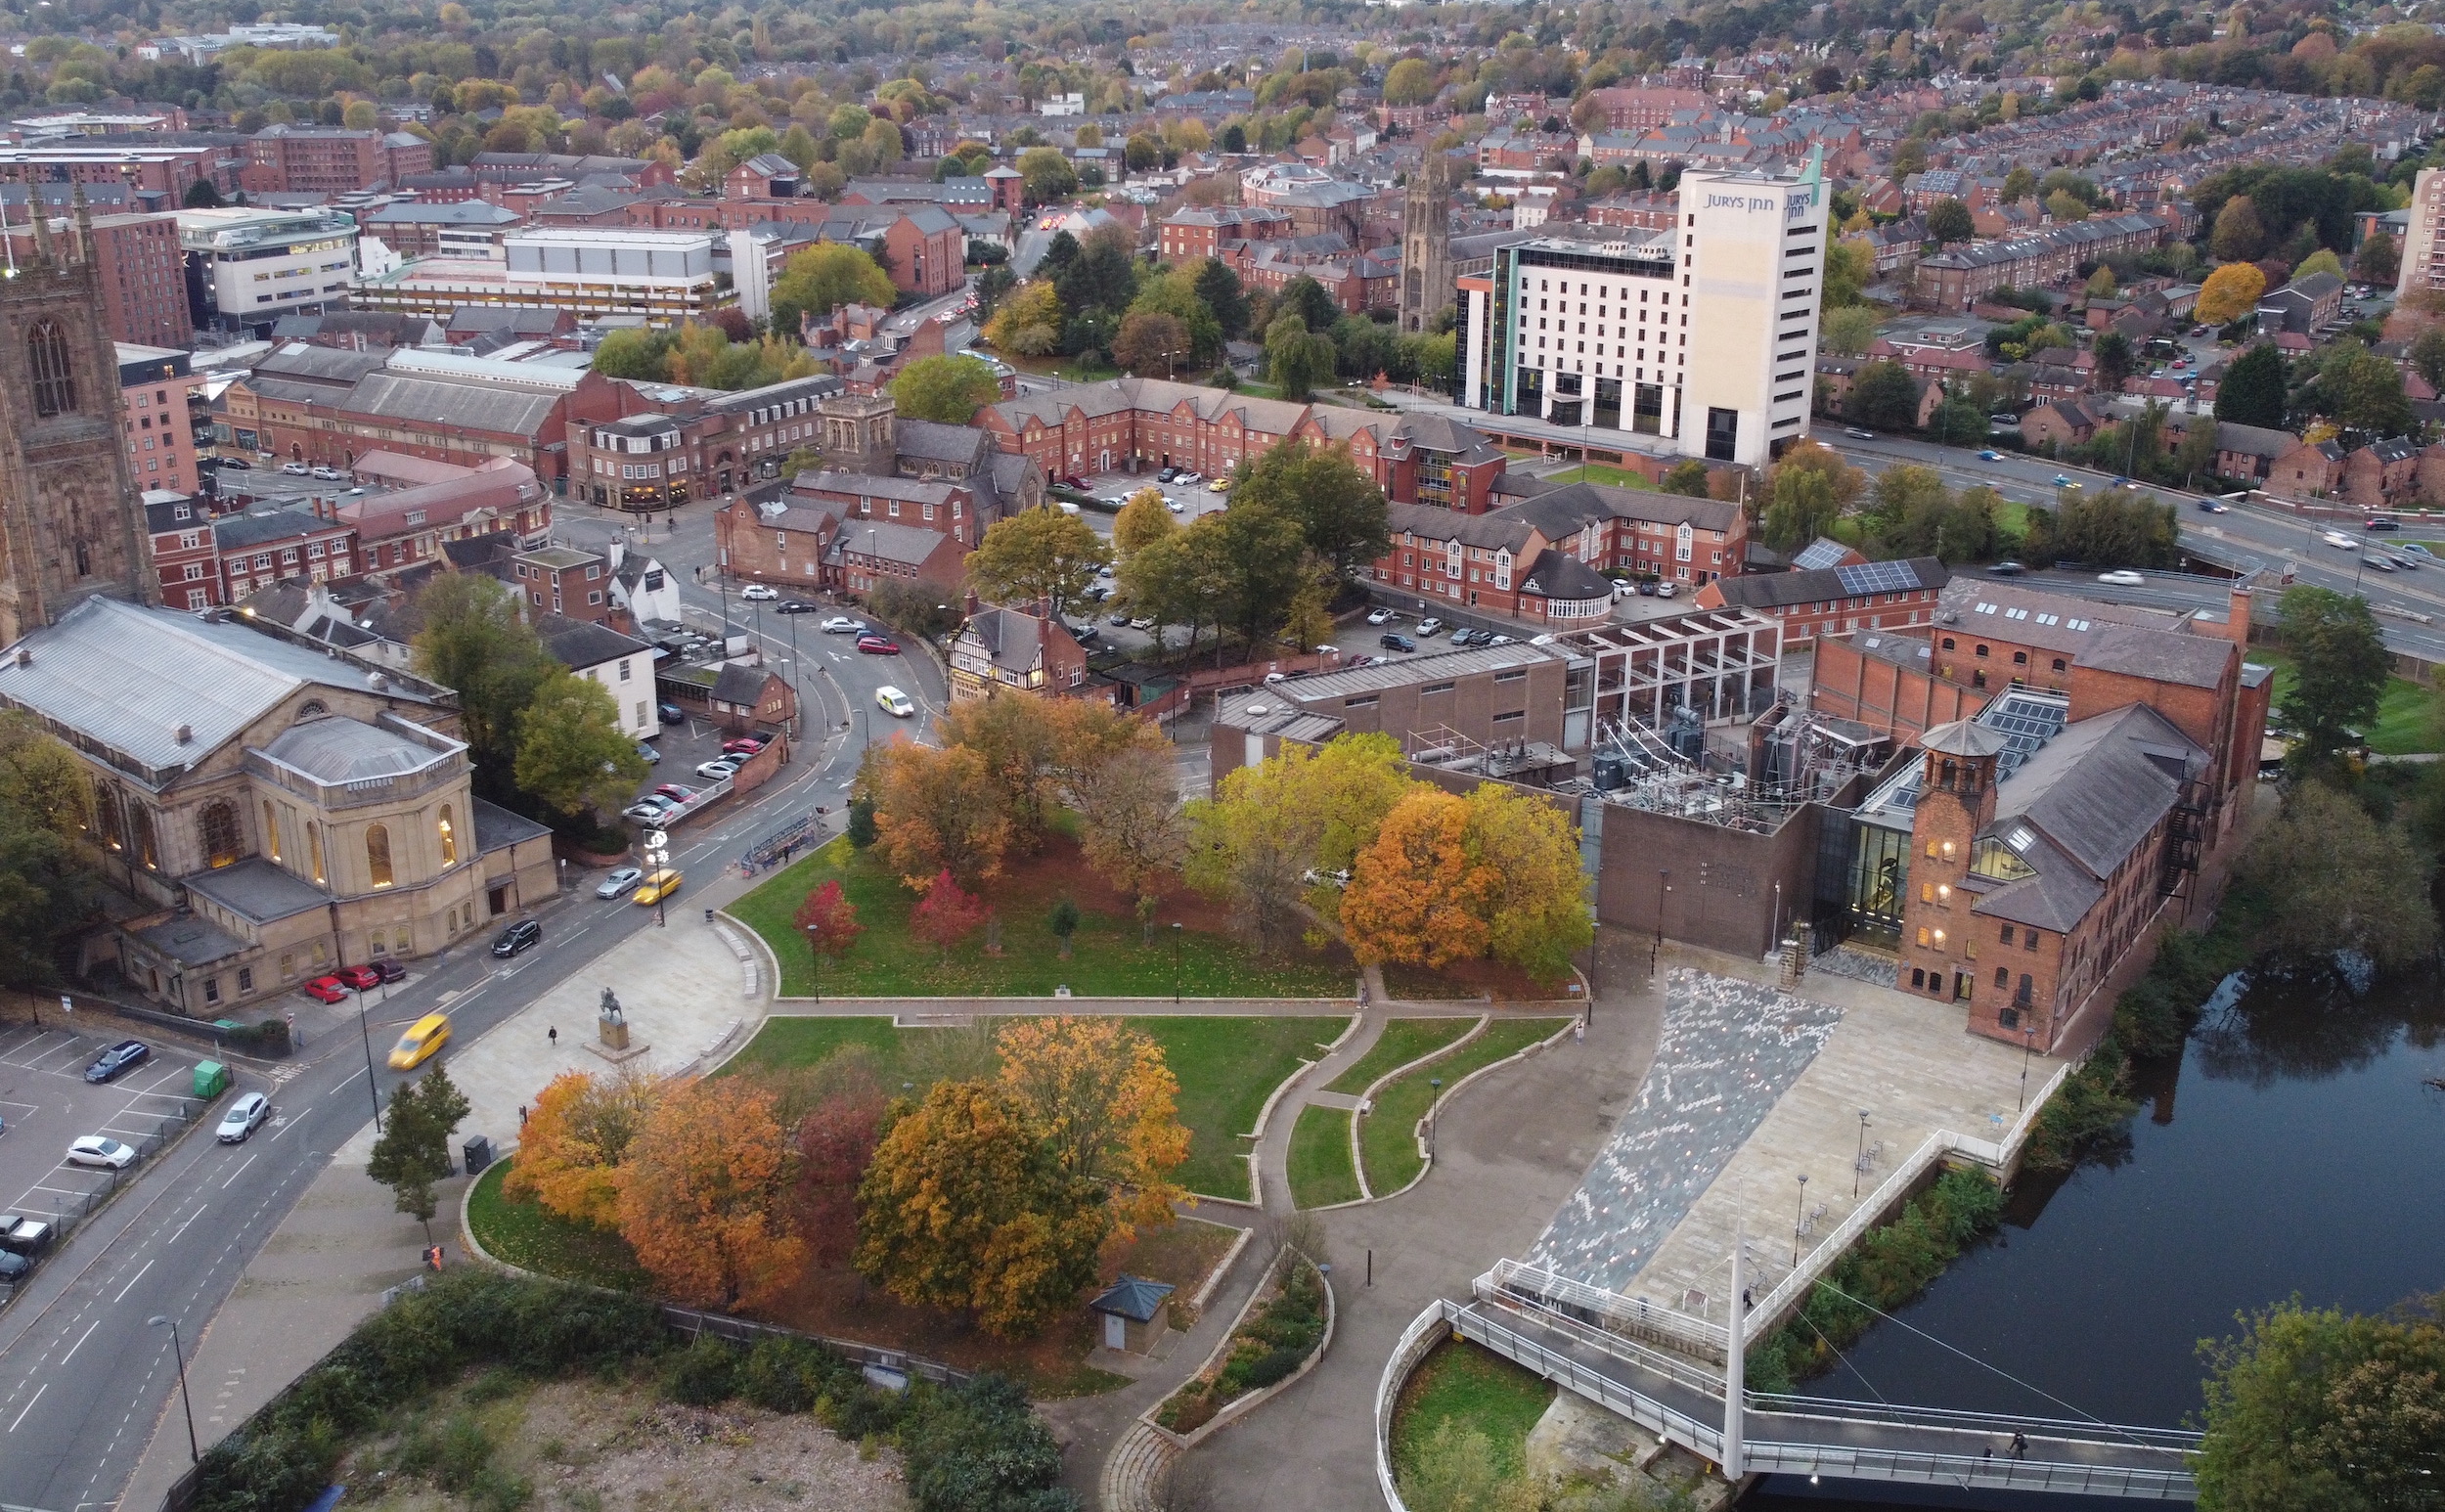 An aerial view of the Cathedral Quarter of Derby City Centre